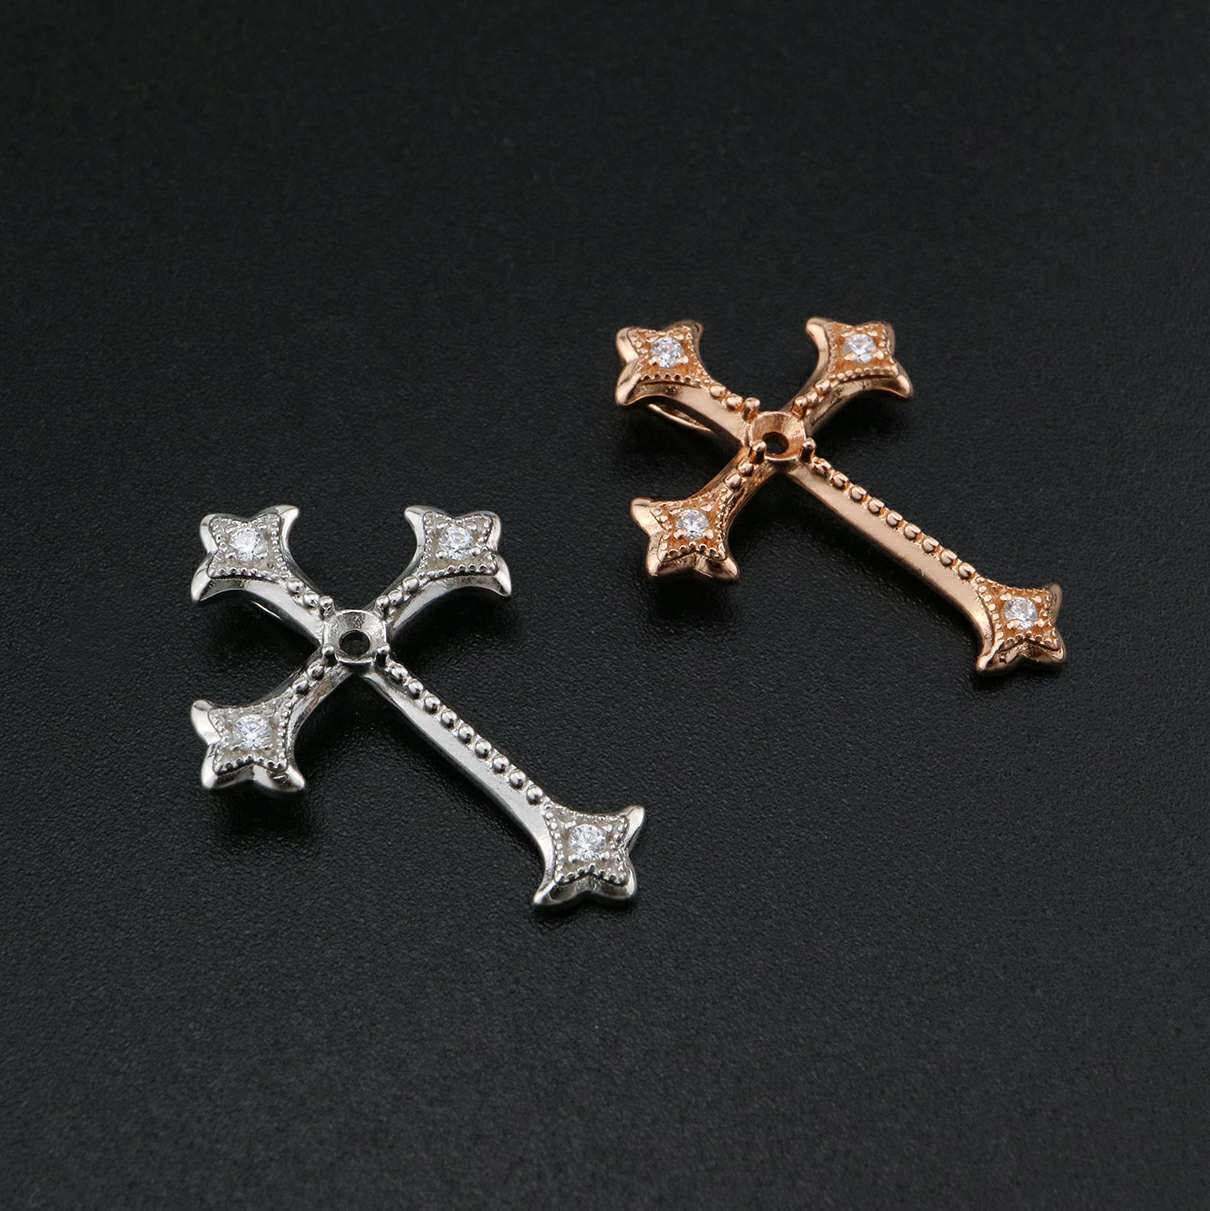 1Pcs 3MM Round Prong Pendant Settings Crose Rose Gold Plated Solid 925 Sterling Silver Charm Bezel Tray DIY Supplies 1411264 - Click Image to Close